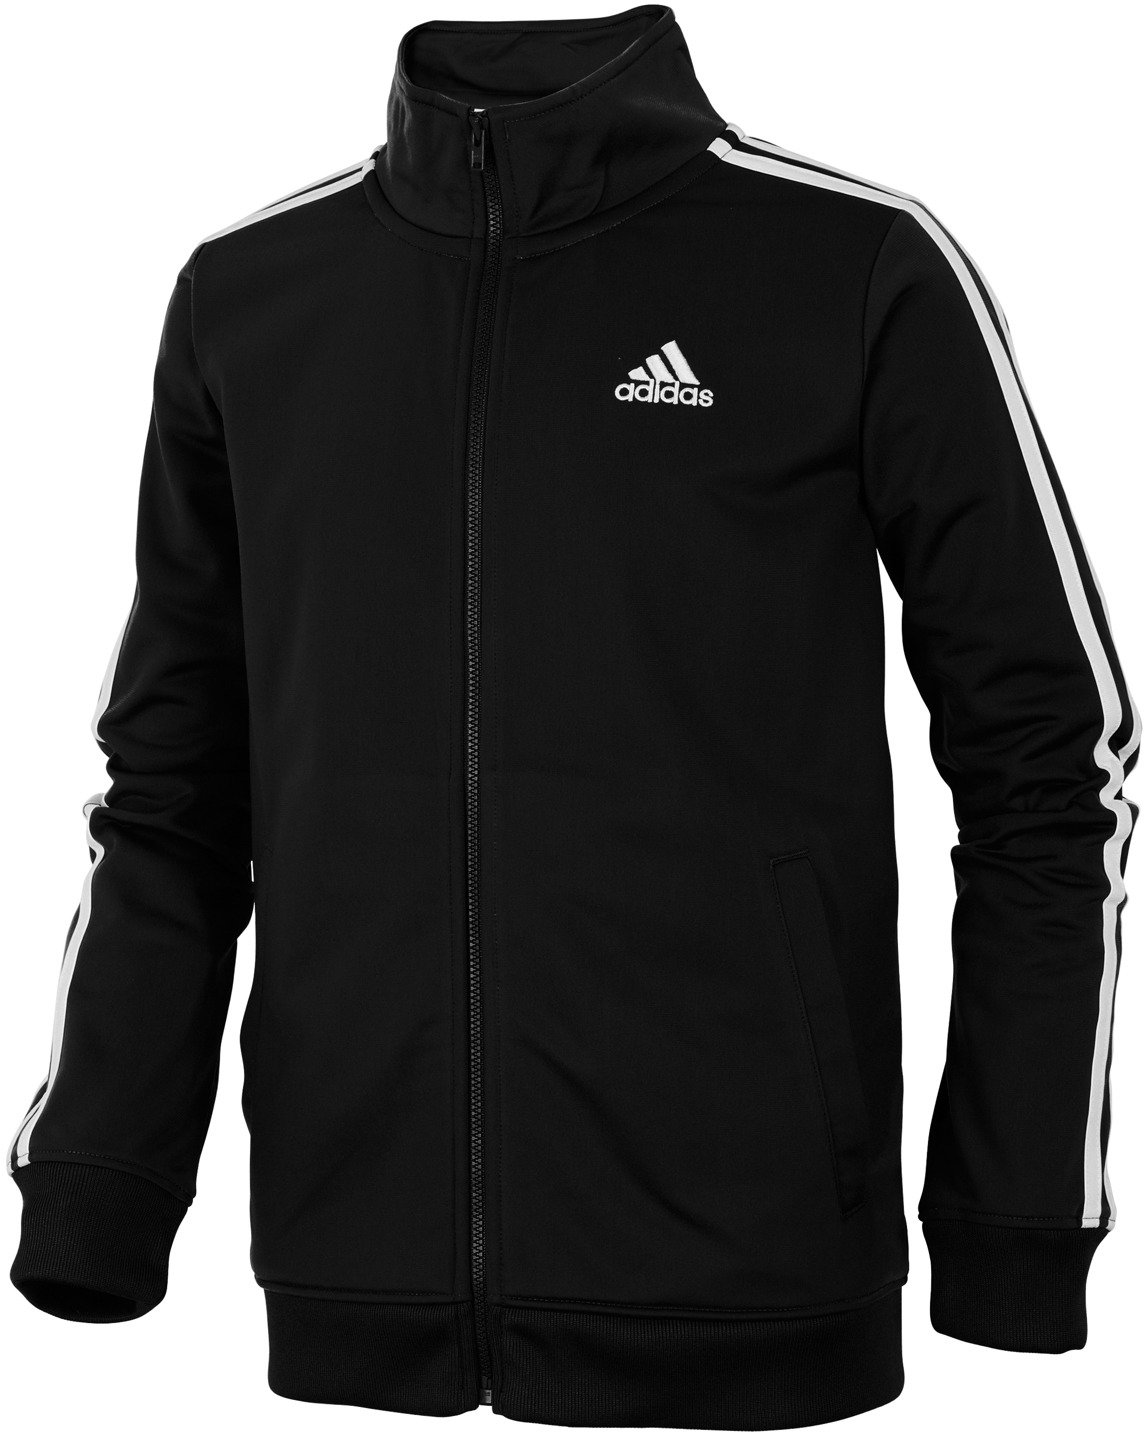 adidas Boys' Iconic Tricot Jacket | Free Shipping at Academy